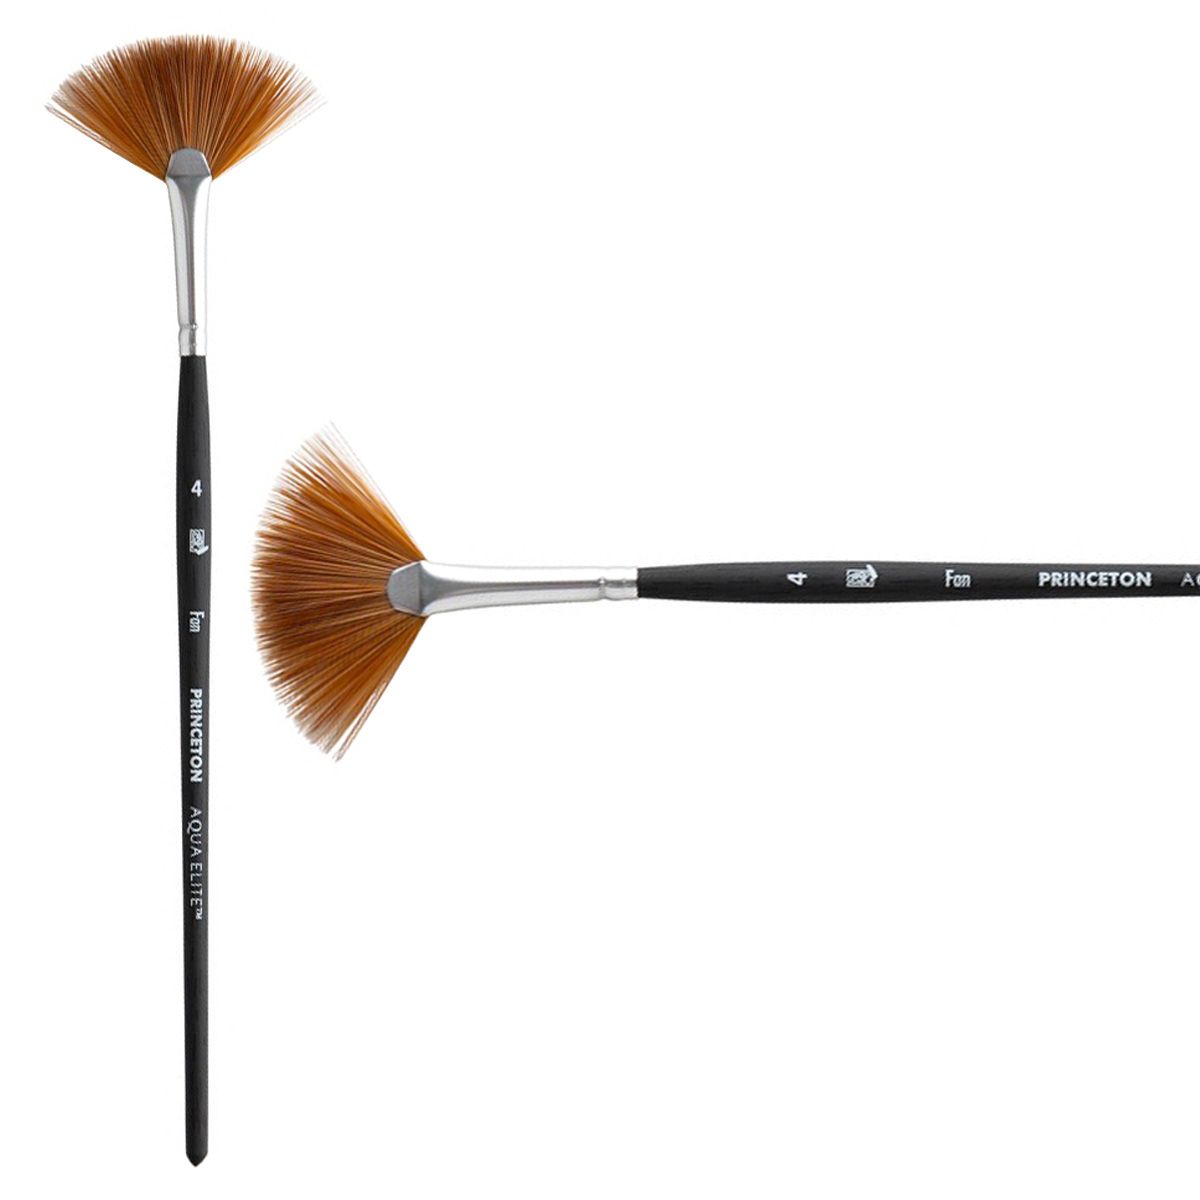 Original or fake? I ordered 1 princeton neptune brush from , it had  good reviews and the brand is listed as princeton but when my package came  today, it had 6 of